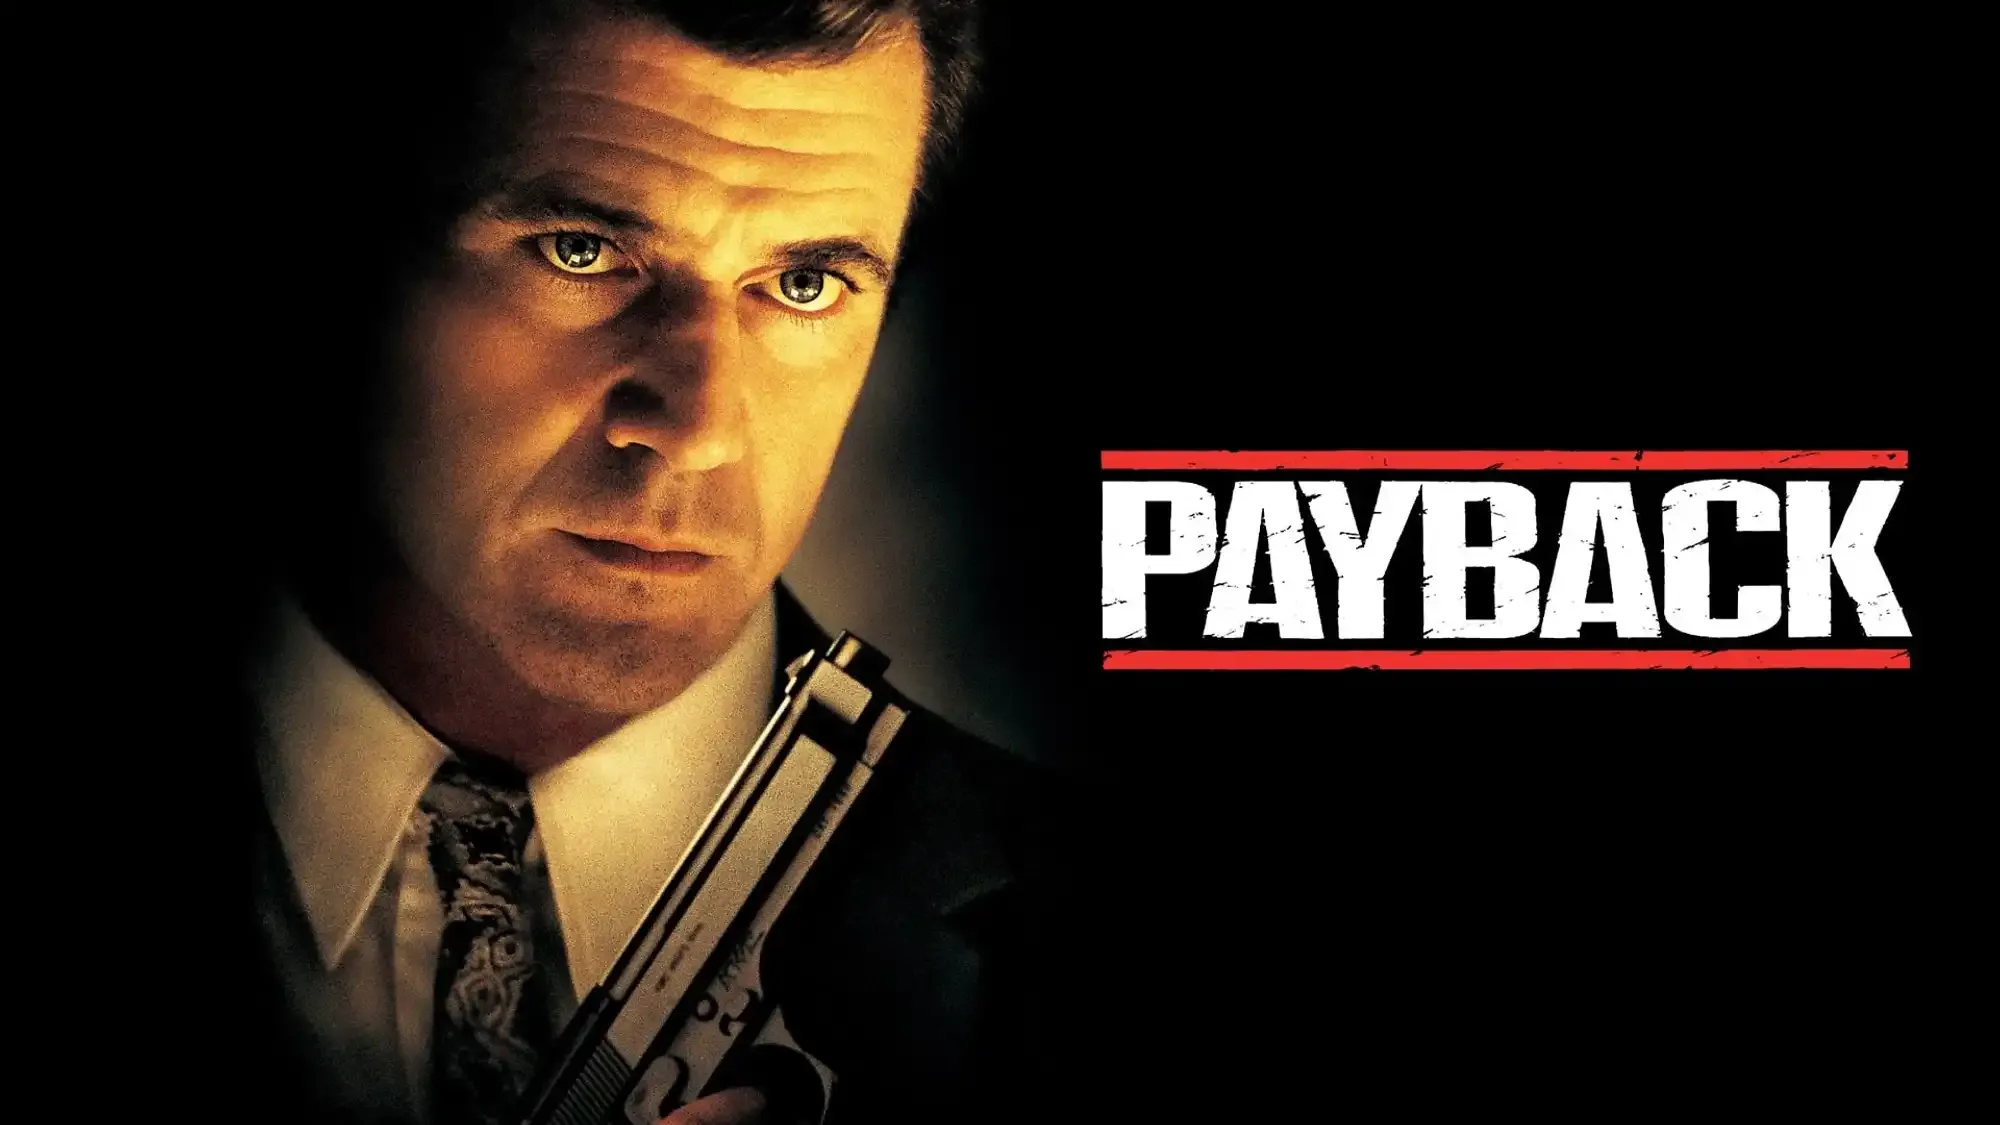 Payback movie review